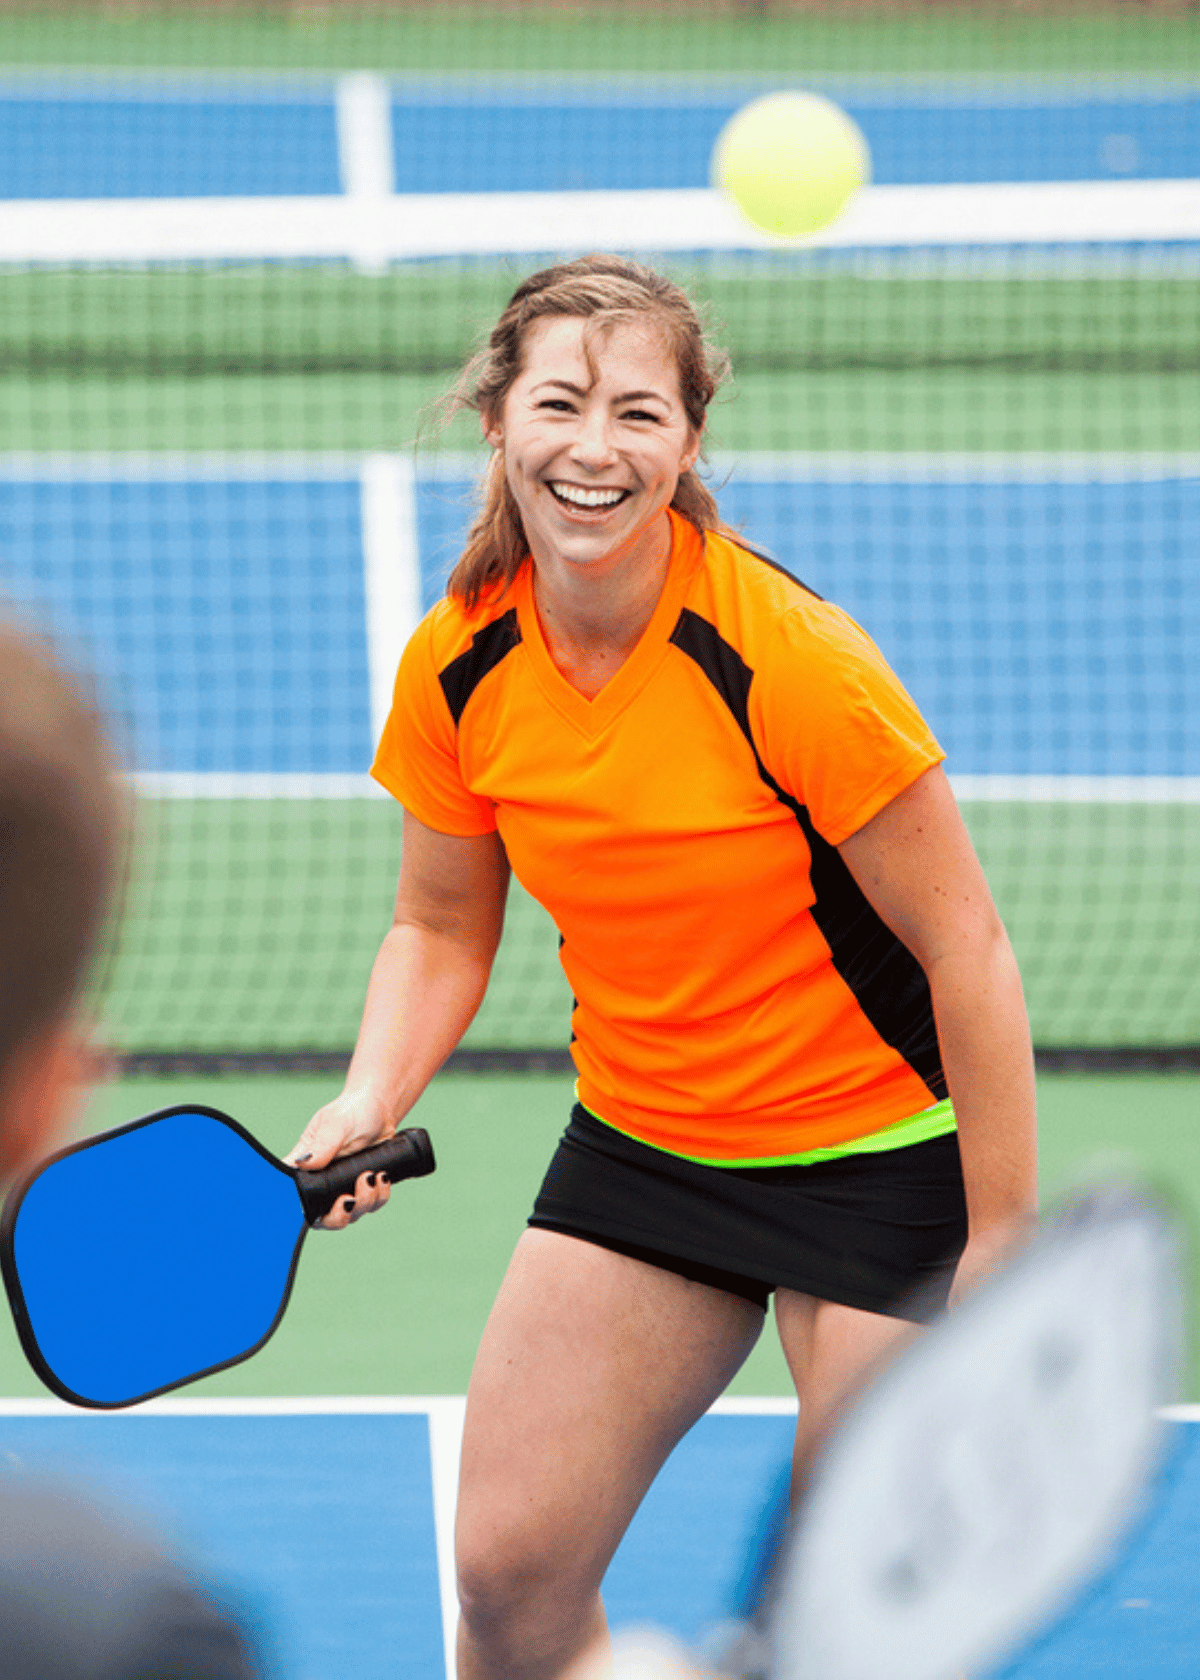 Best Women's Pickleball Outfits: Our Top Picks